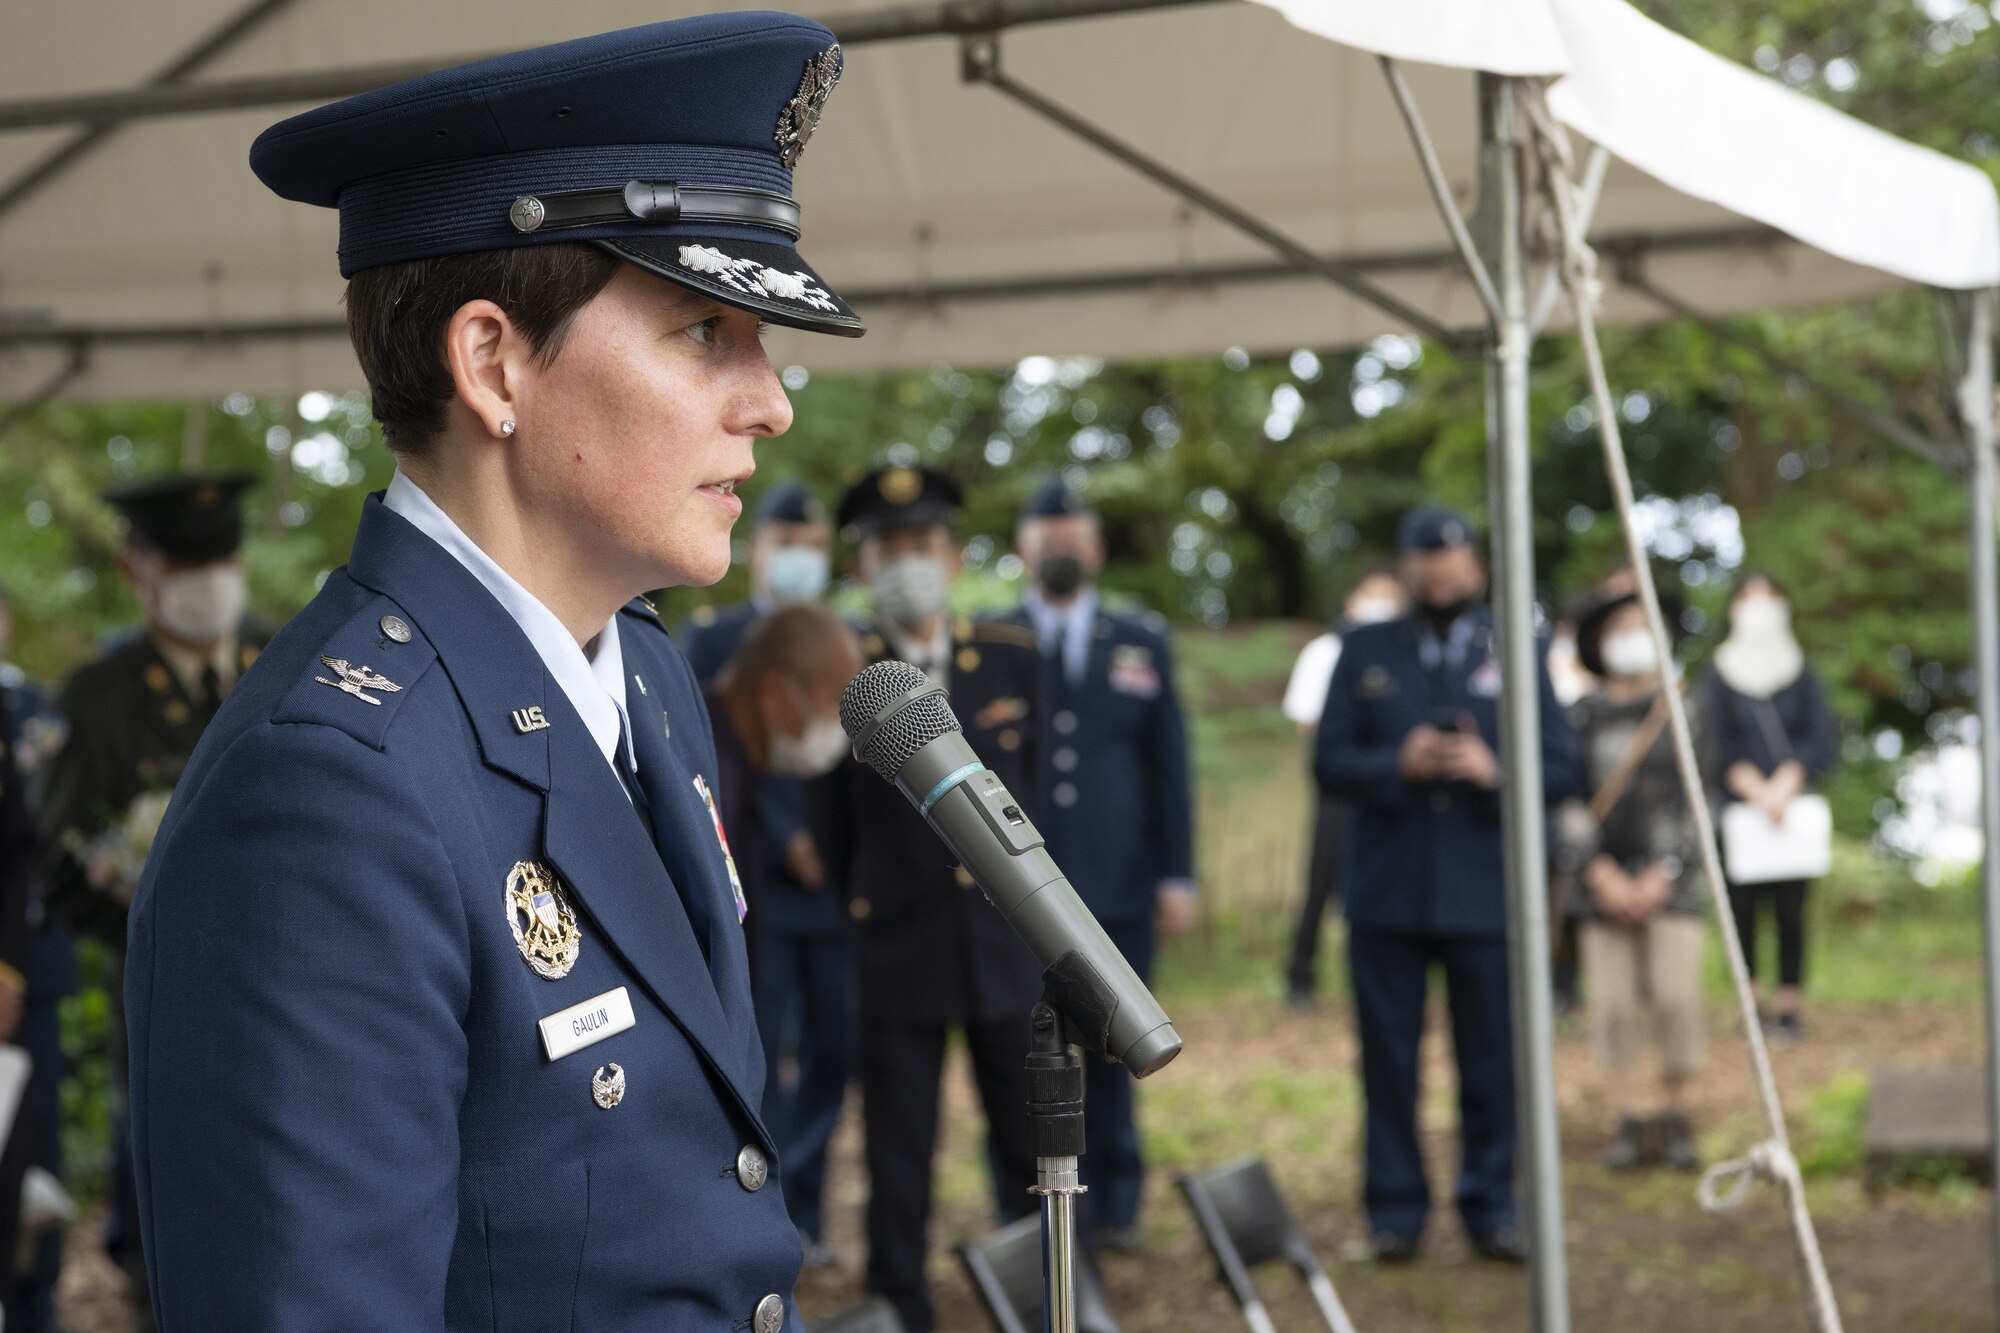 U.S. Air Force Col. Julie Gaulin, 374th Airlift Wing vice commander, delivers a speech commemorating those who lost their lives during World War II as part of a U.S.-Japan Joint Memorial Service June 11, 2022, at Mt. Shizuhata, Shizuoka city, Japan. The memorial service provided participants the opportunity to honor those who lost their lives during a World War II air raid on June 20, 1945. During the raid, two U.S. Army Air Forces B-29 Superfortresses collided mid-air over Shizuoka City, resulting in the death of 23 Airmen on board the aircraft. Representatives of the U.S. Air Force’s Yokota Air Base, Japan Self Defense Force, and Shizuoka City rendered their respects to the Airmen and Japanese civilians who lost their lives as a result of the tragedy, and reflected on the strong alliance the U.S. and Japan have forged since the end of World War II. (U.S. Air Force photo by Tech. Sgt. Christopher Hubenthal)